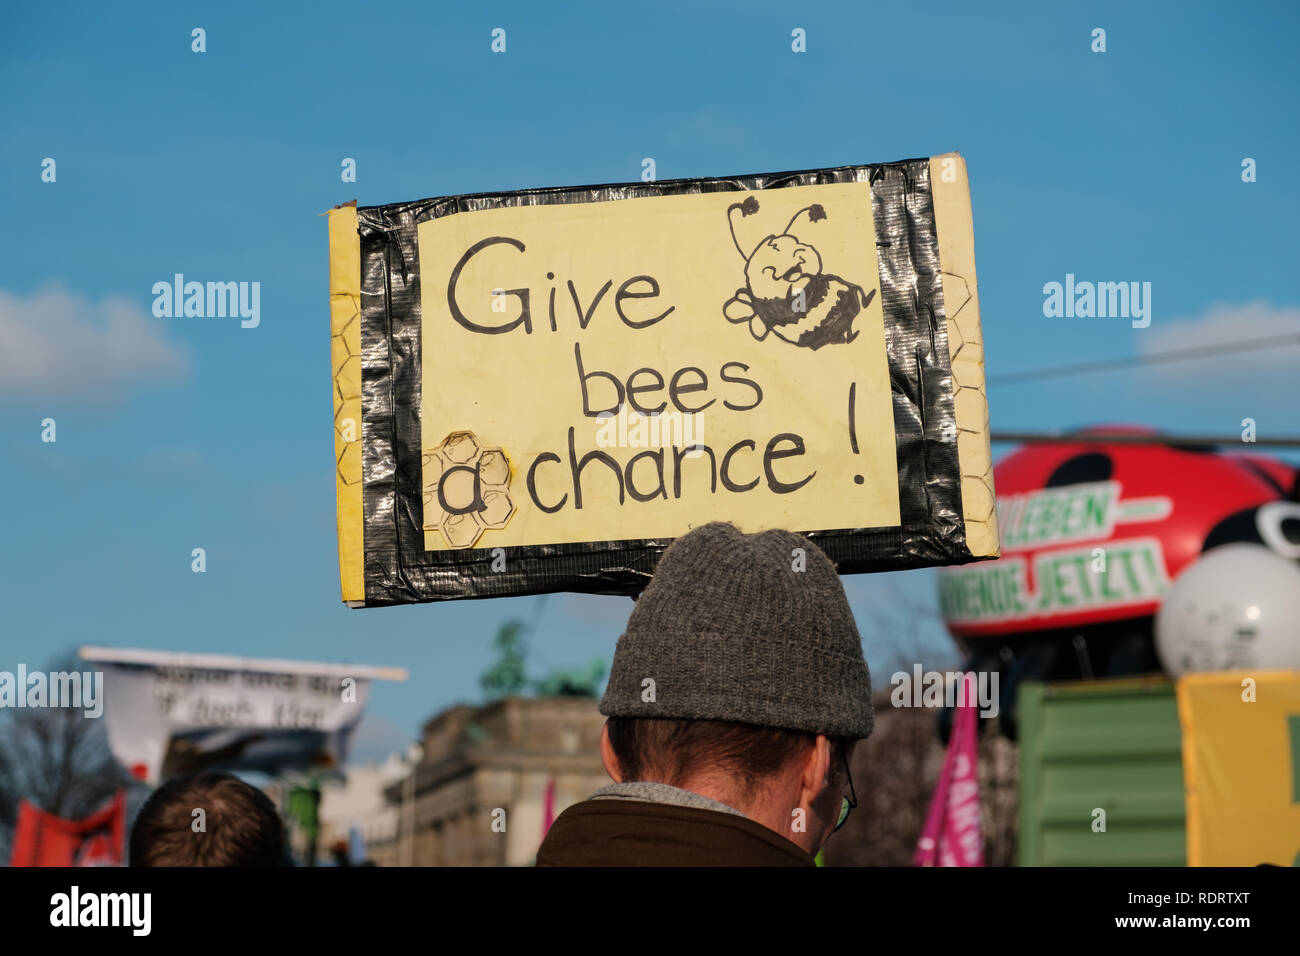 Berlin, Germany - January 19, 2019: Demonstration 'Wir haben es satt', against the german and EU agricultural policy and for sustainable agriculture in Berlin, Germany Credit: hanohiki/Alamy Live News Stock Photo